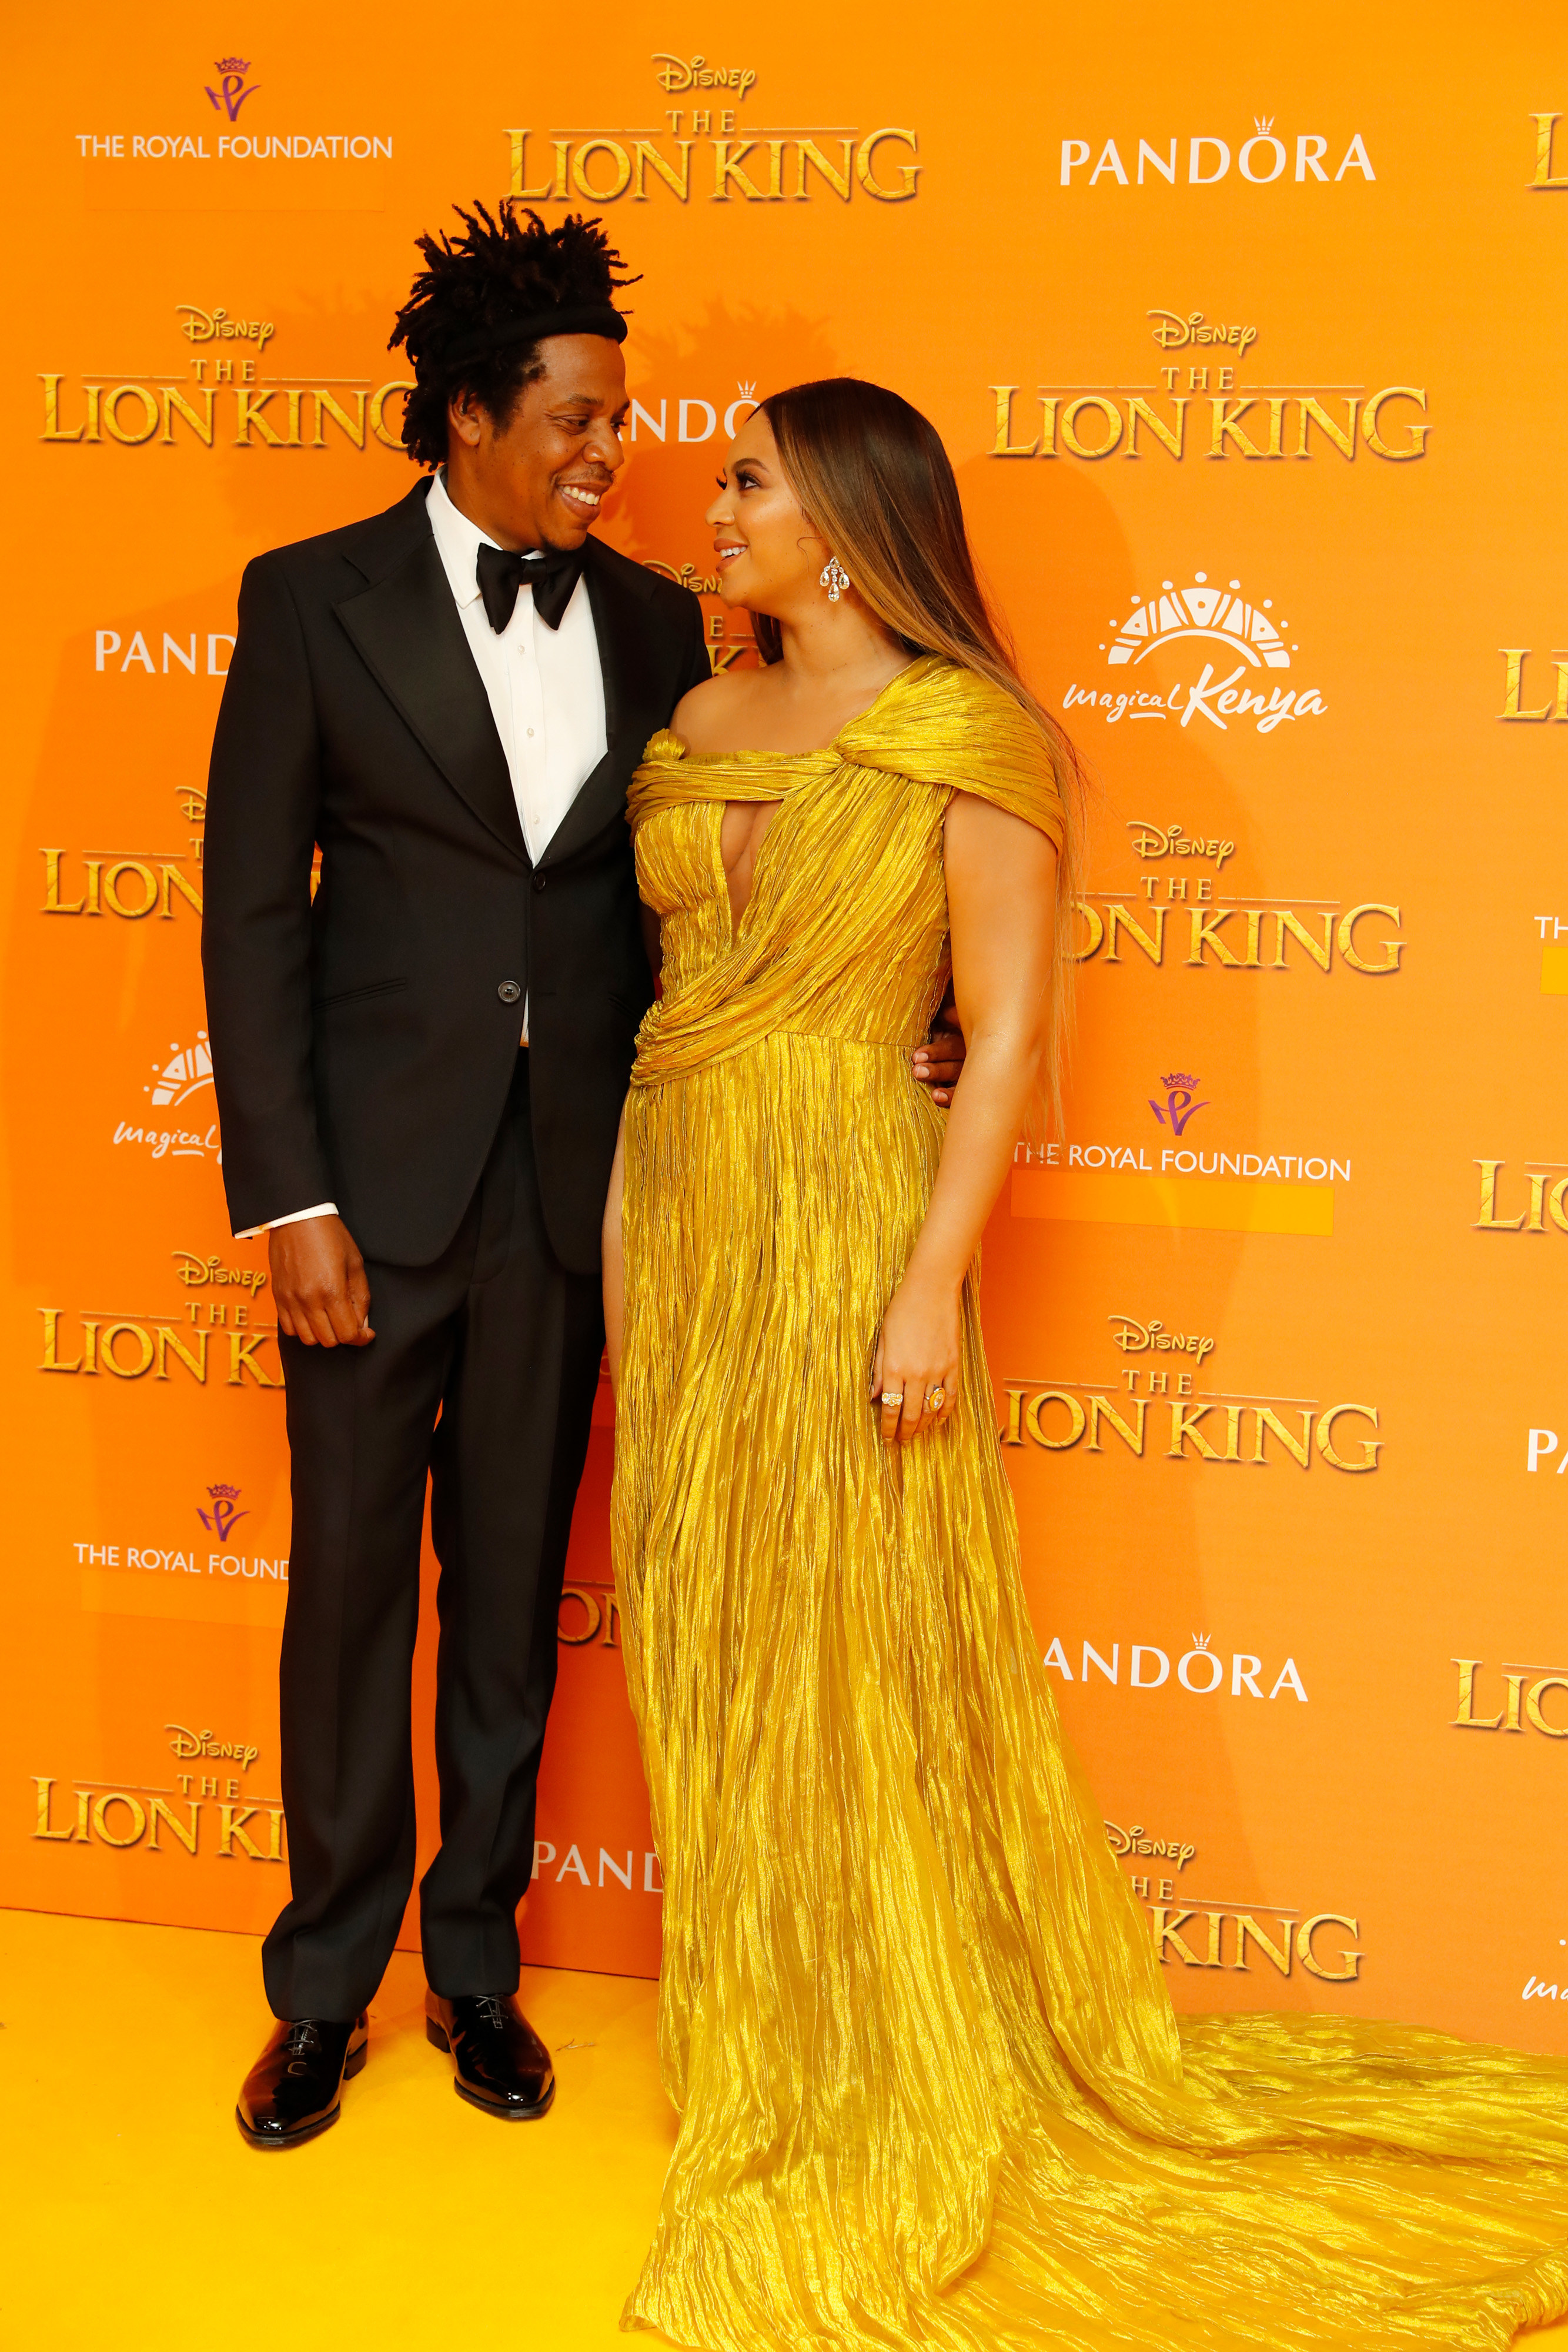 Beyonce in a gold dress and Jay-Z in a black suit at the Lion King premiere